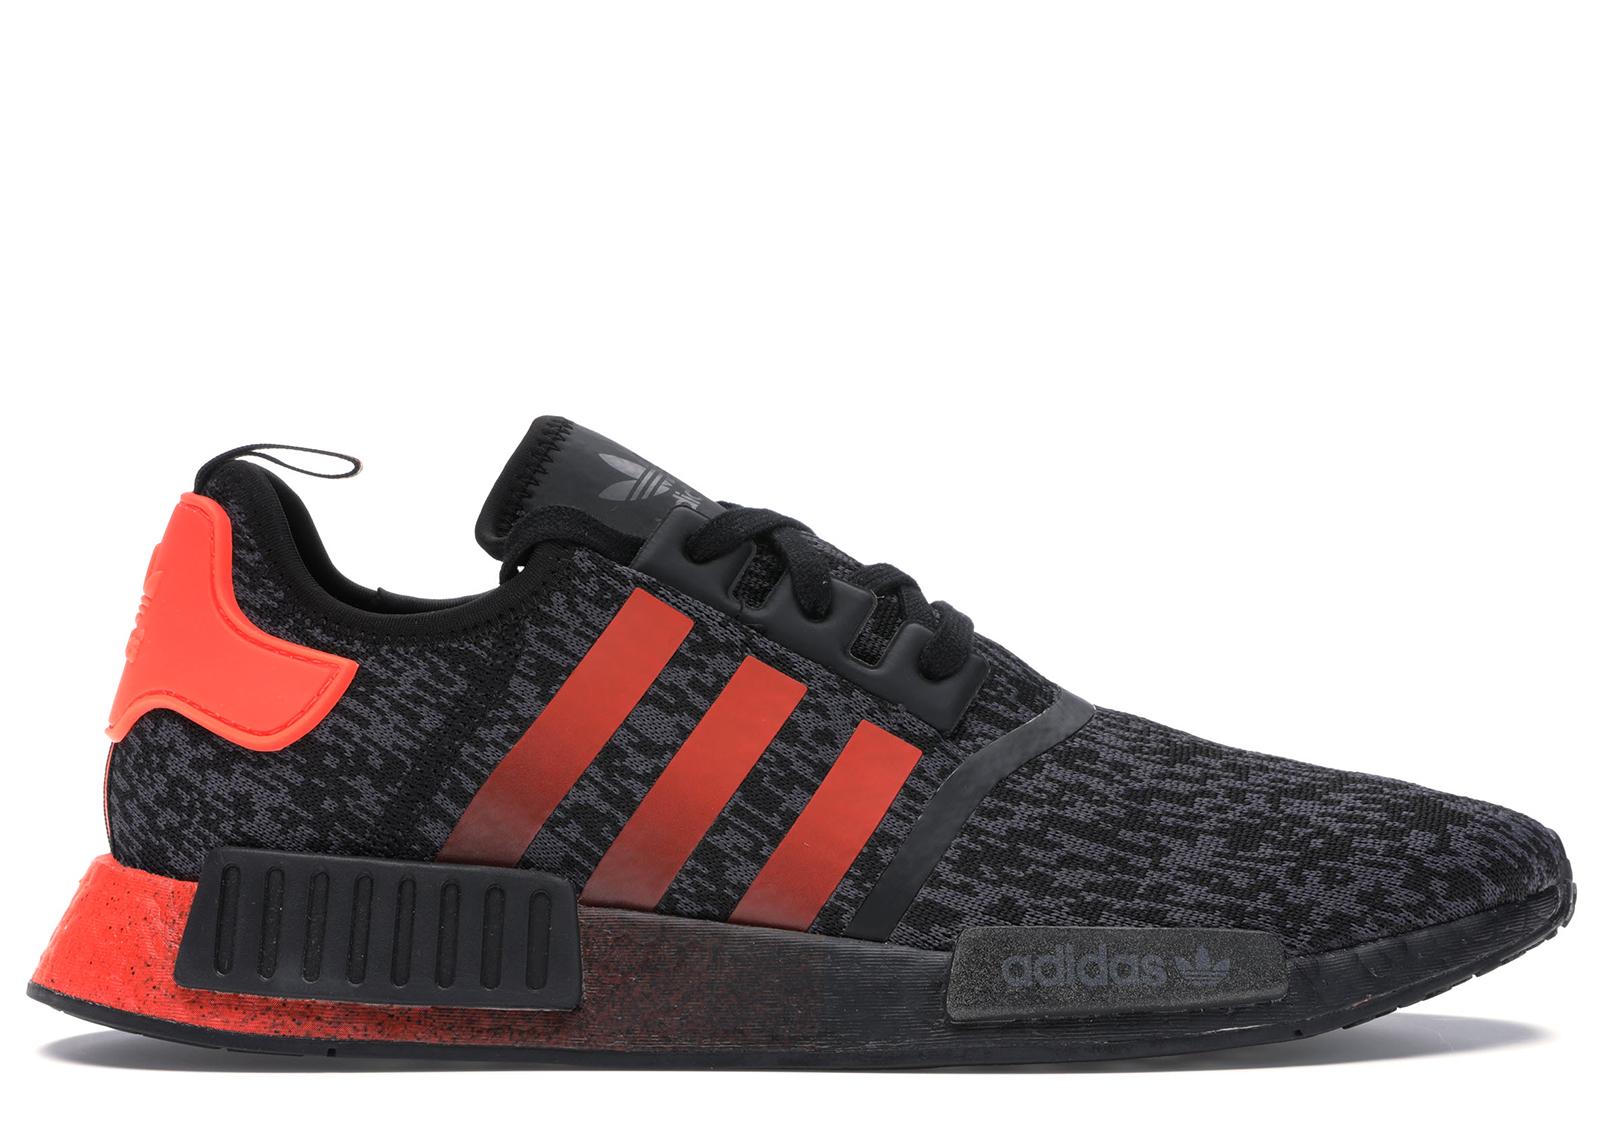 solar red nmd r1